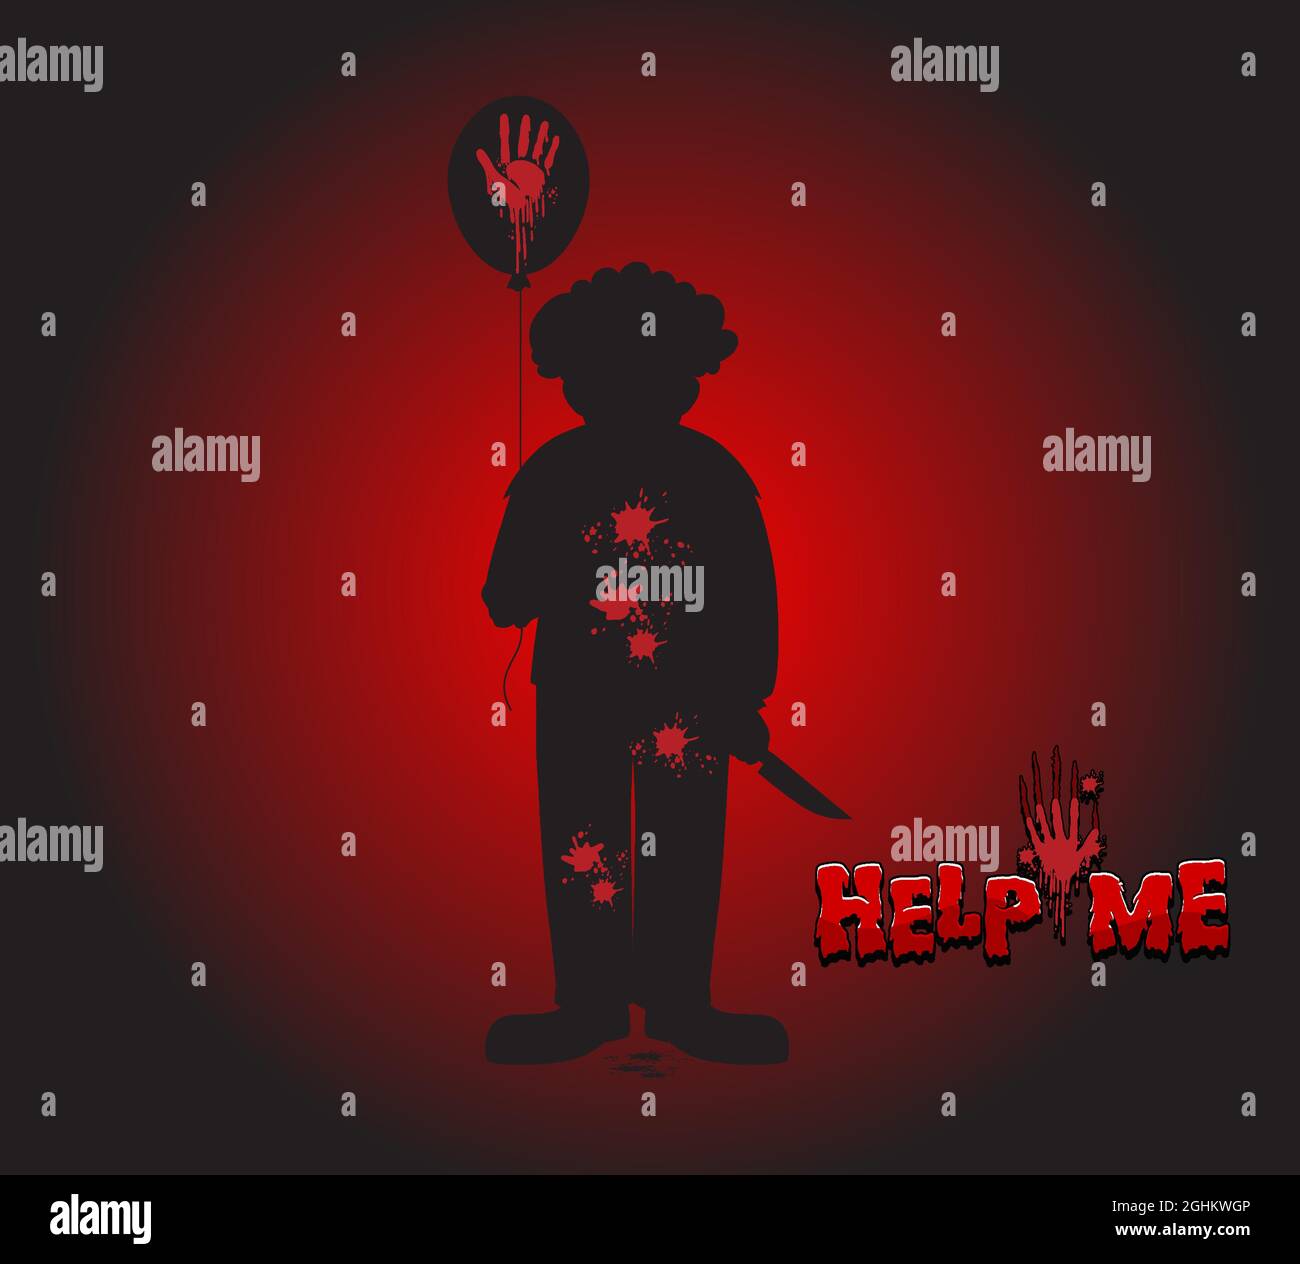 Help Me logo with creepy clown silhouette illustration Stock Vector